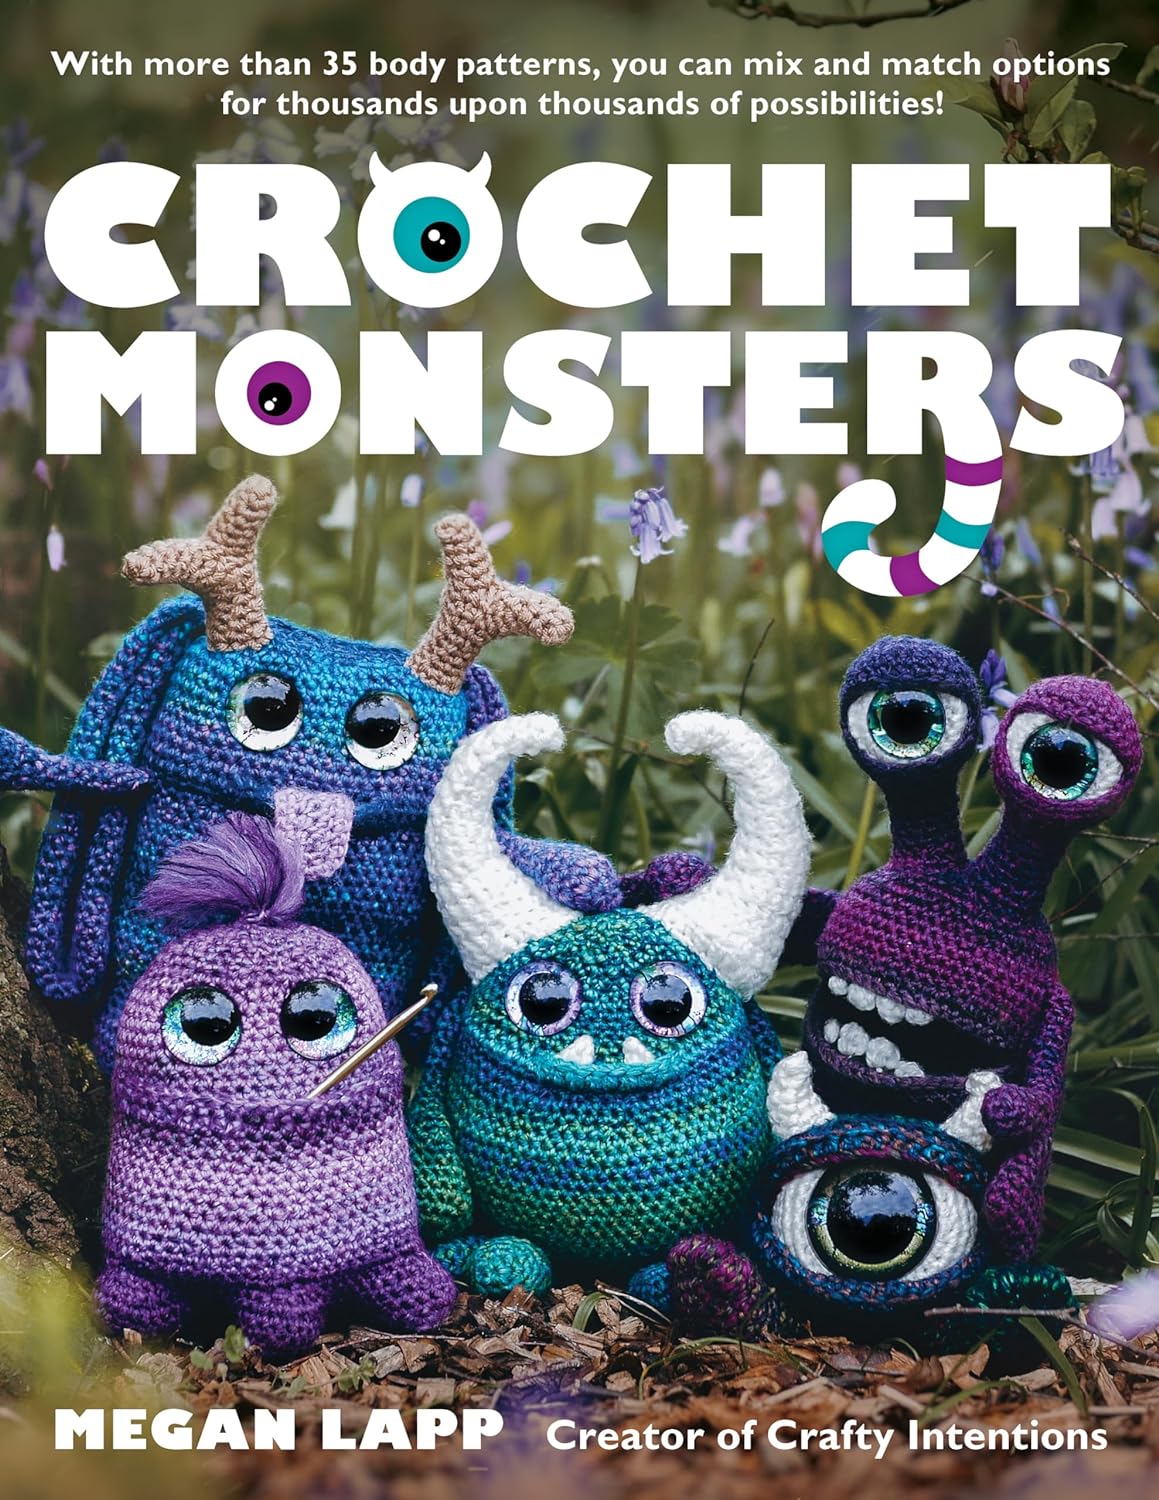 Crochet Monsters: With more than 35 body patterns and options for horns, limbs, antennae and so much more, you can 